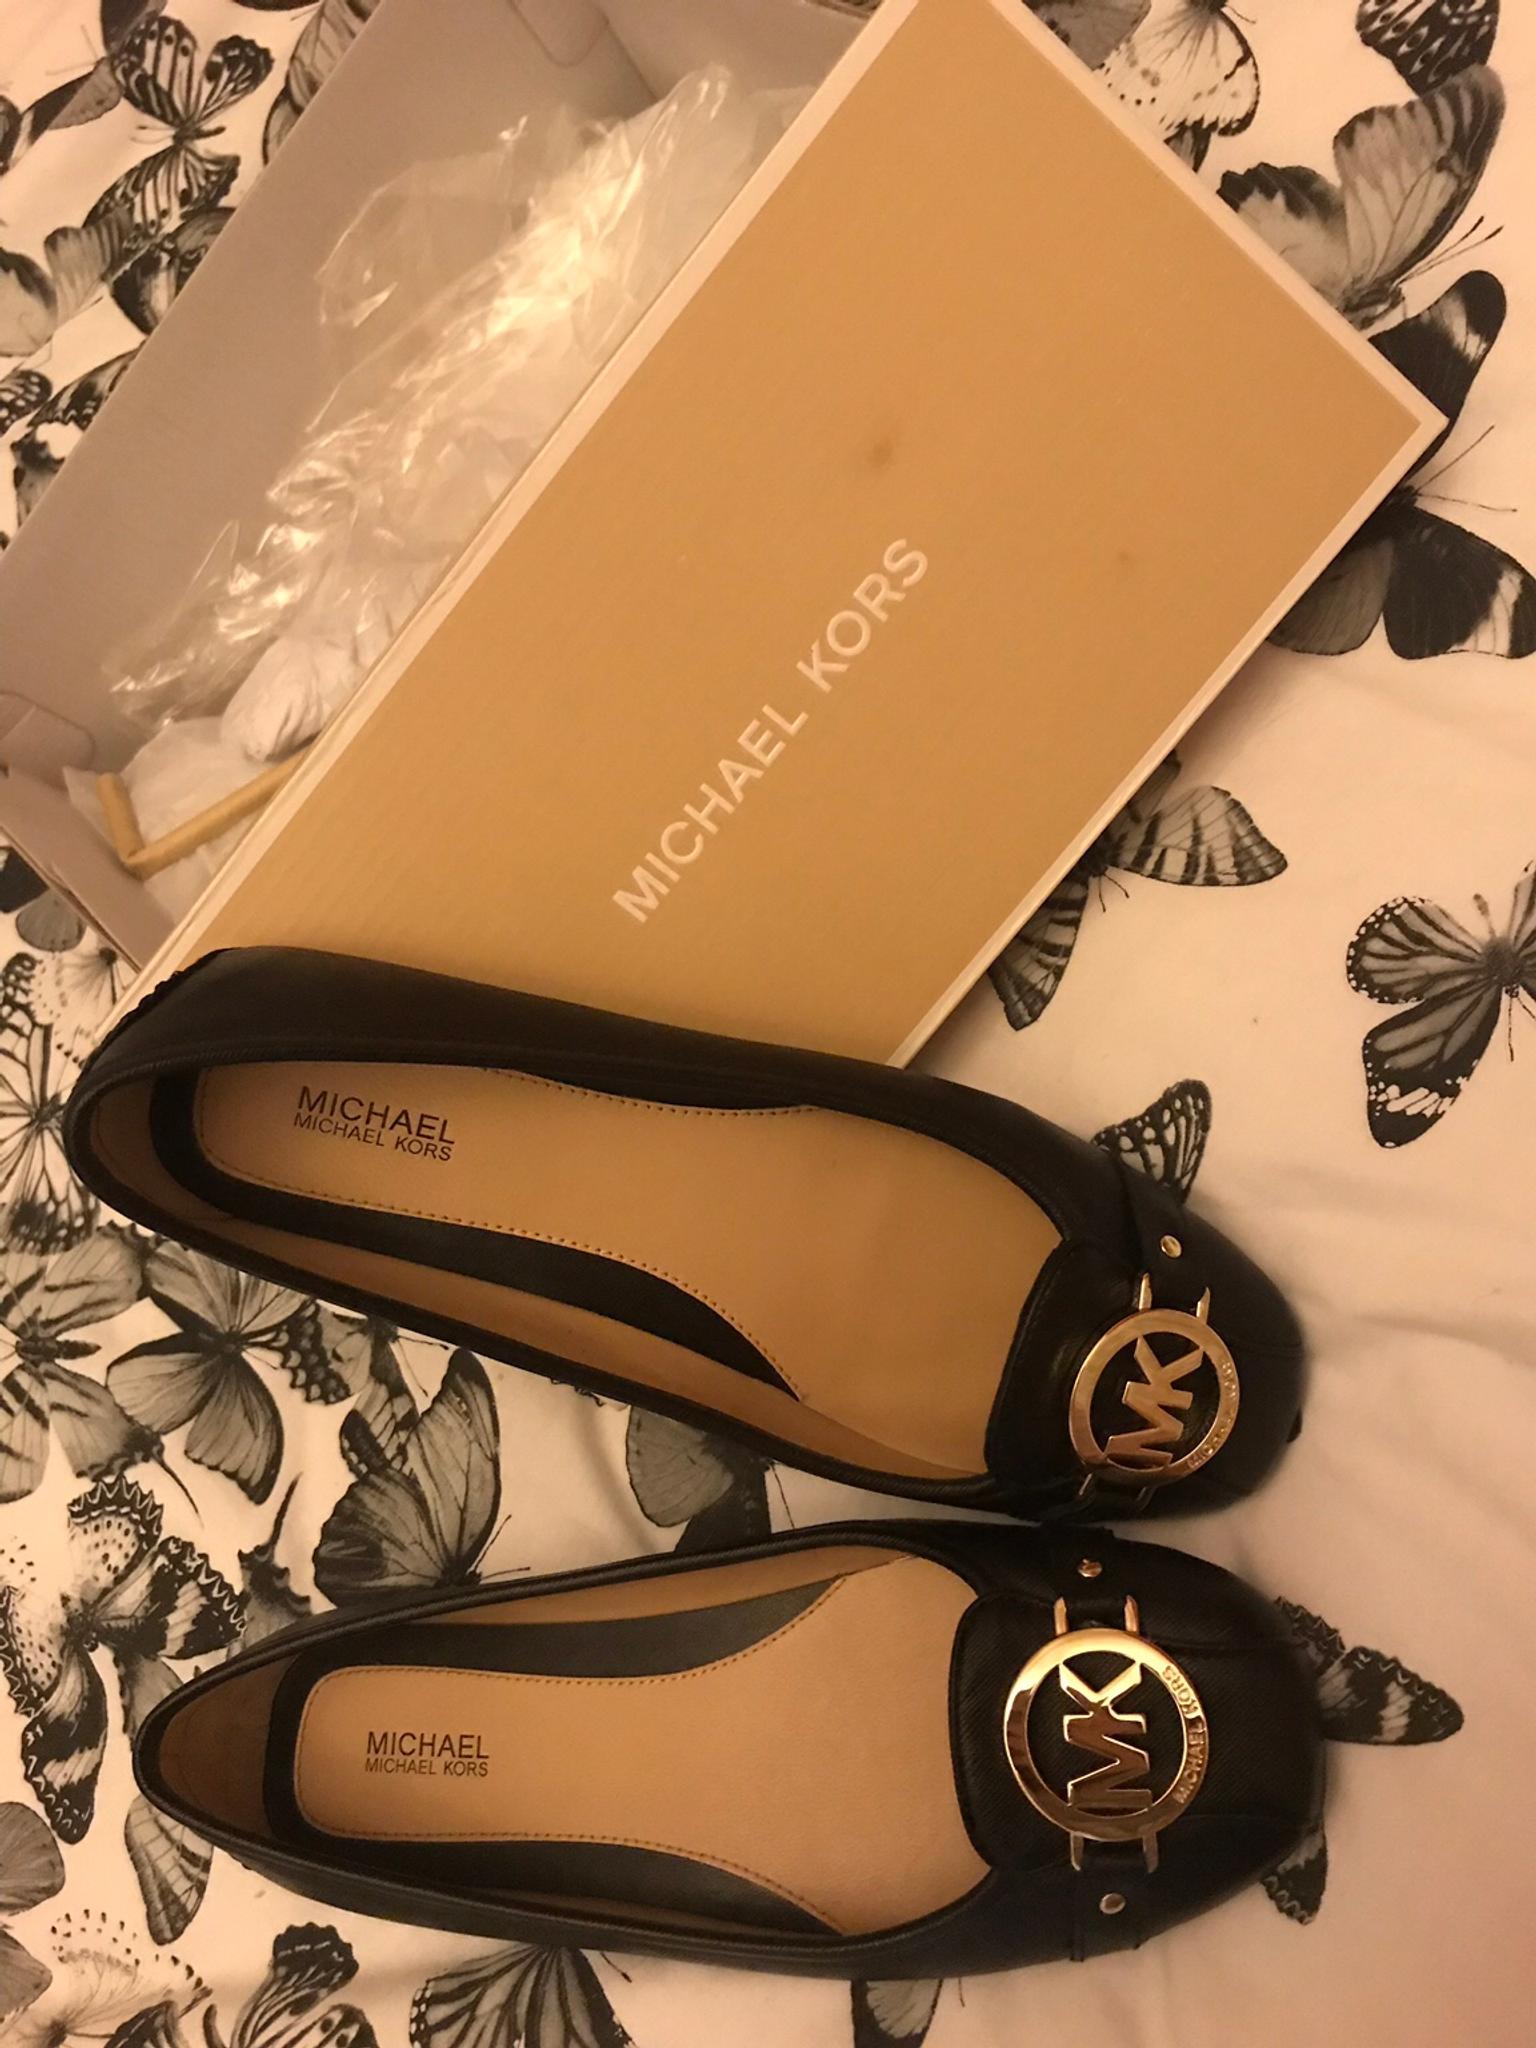 michael kors dolly shoes